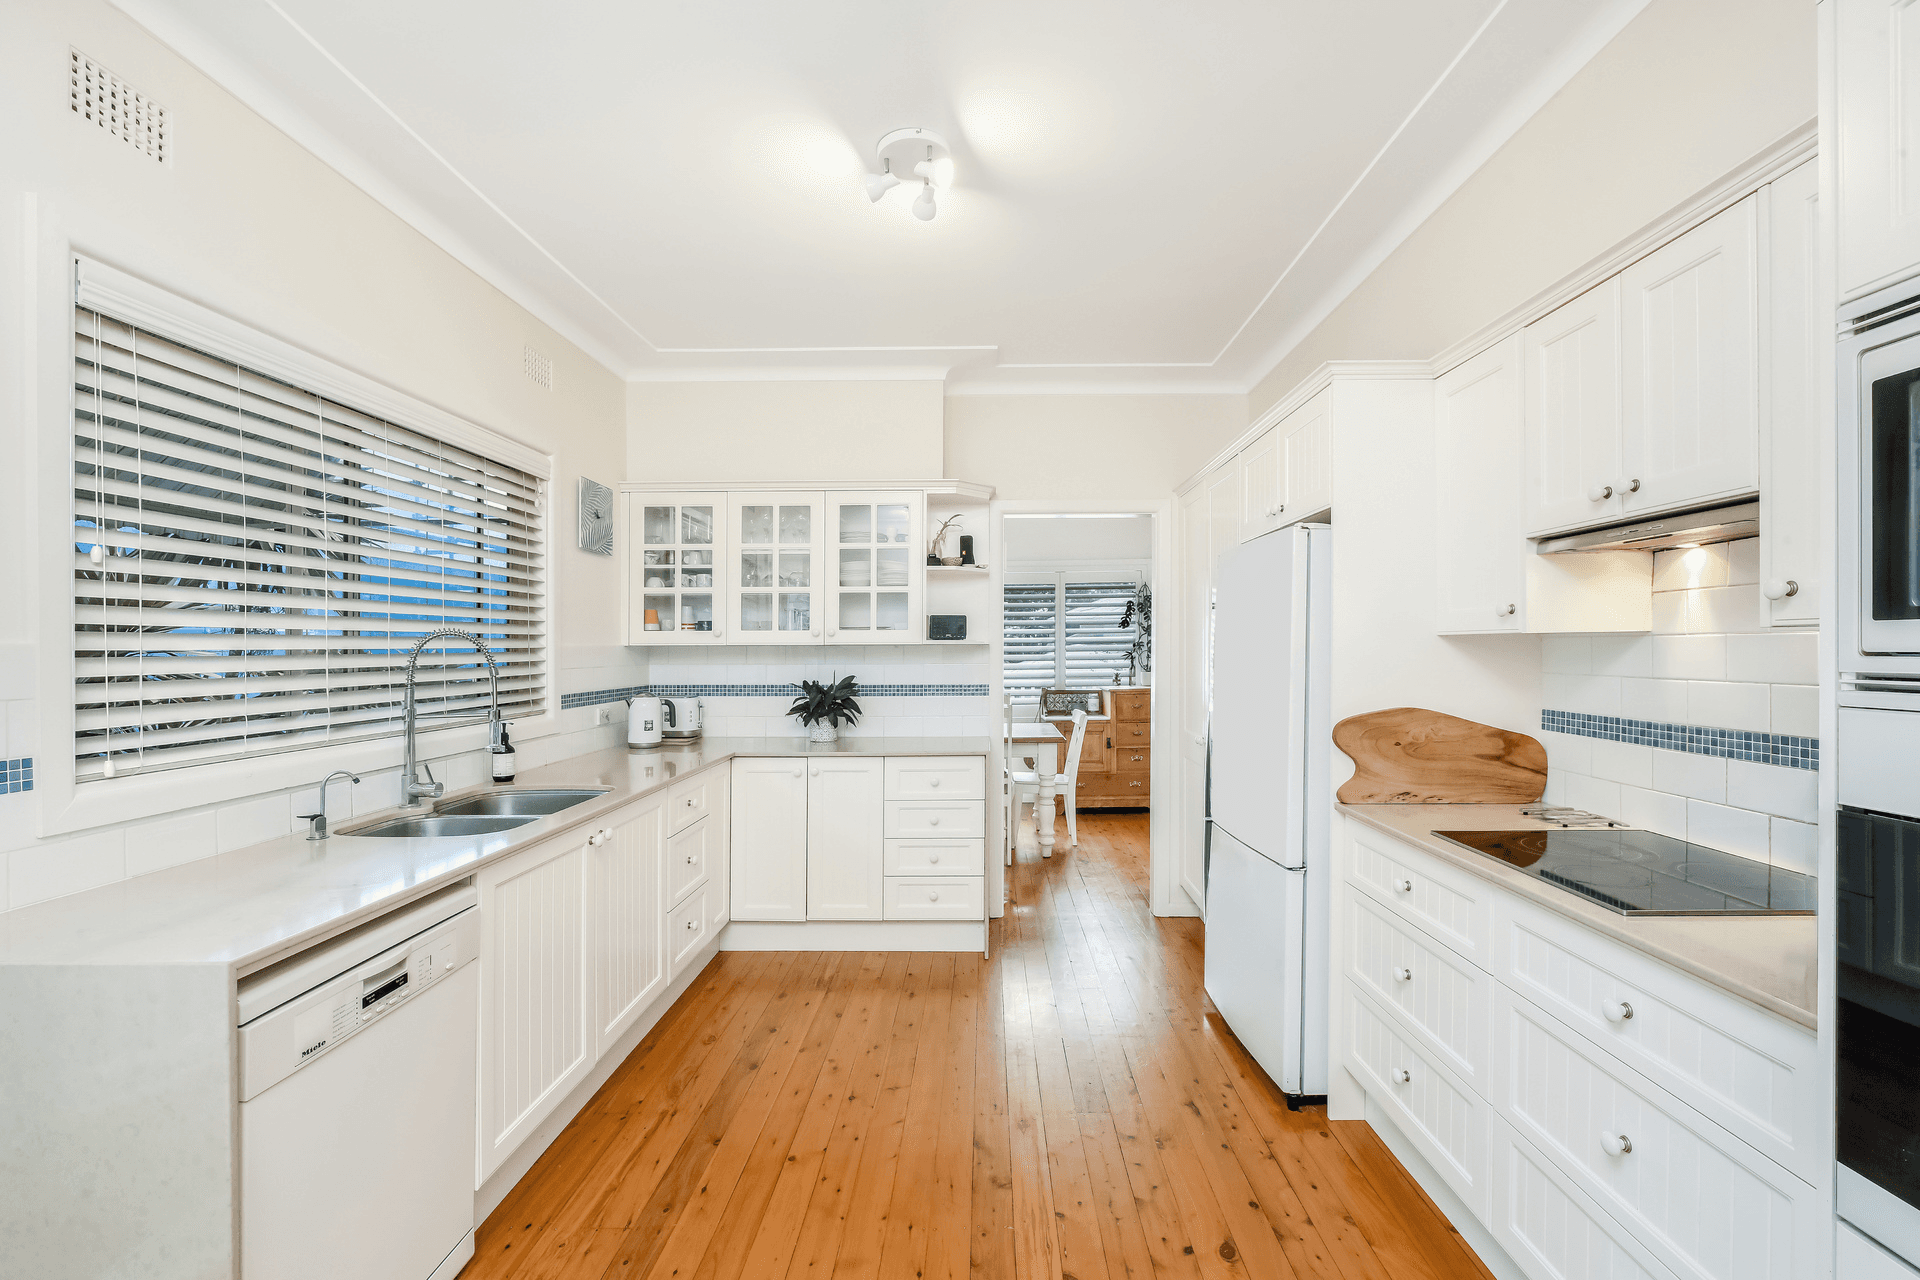 11 Asca Drive, Green Point, NSW 2251